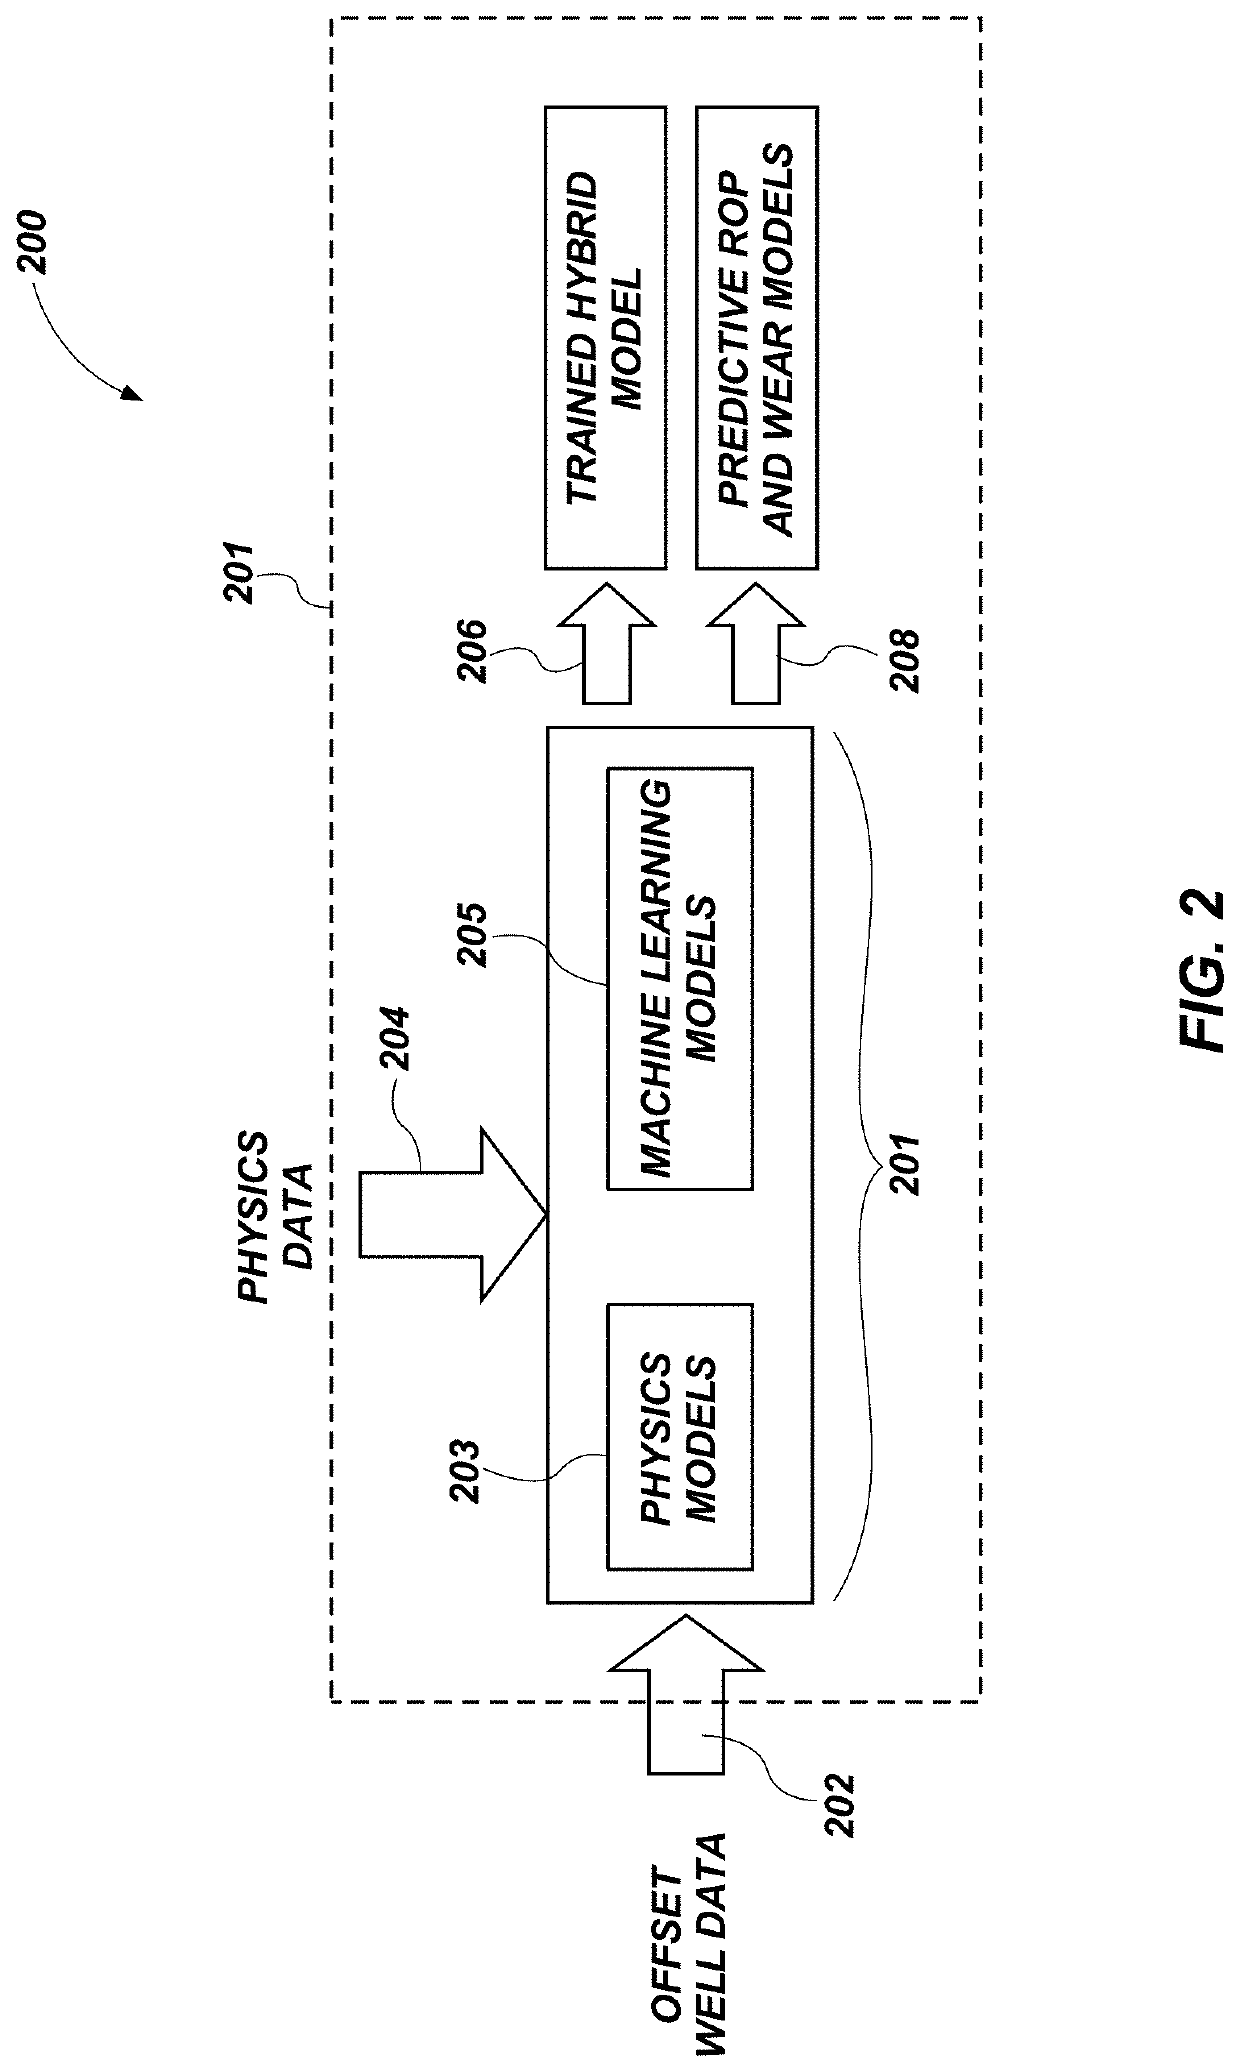 Earth-boring tool rate of penetration and wear prediction system and related methods